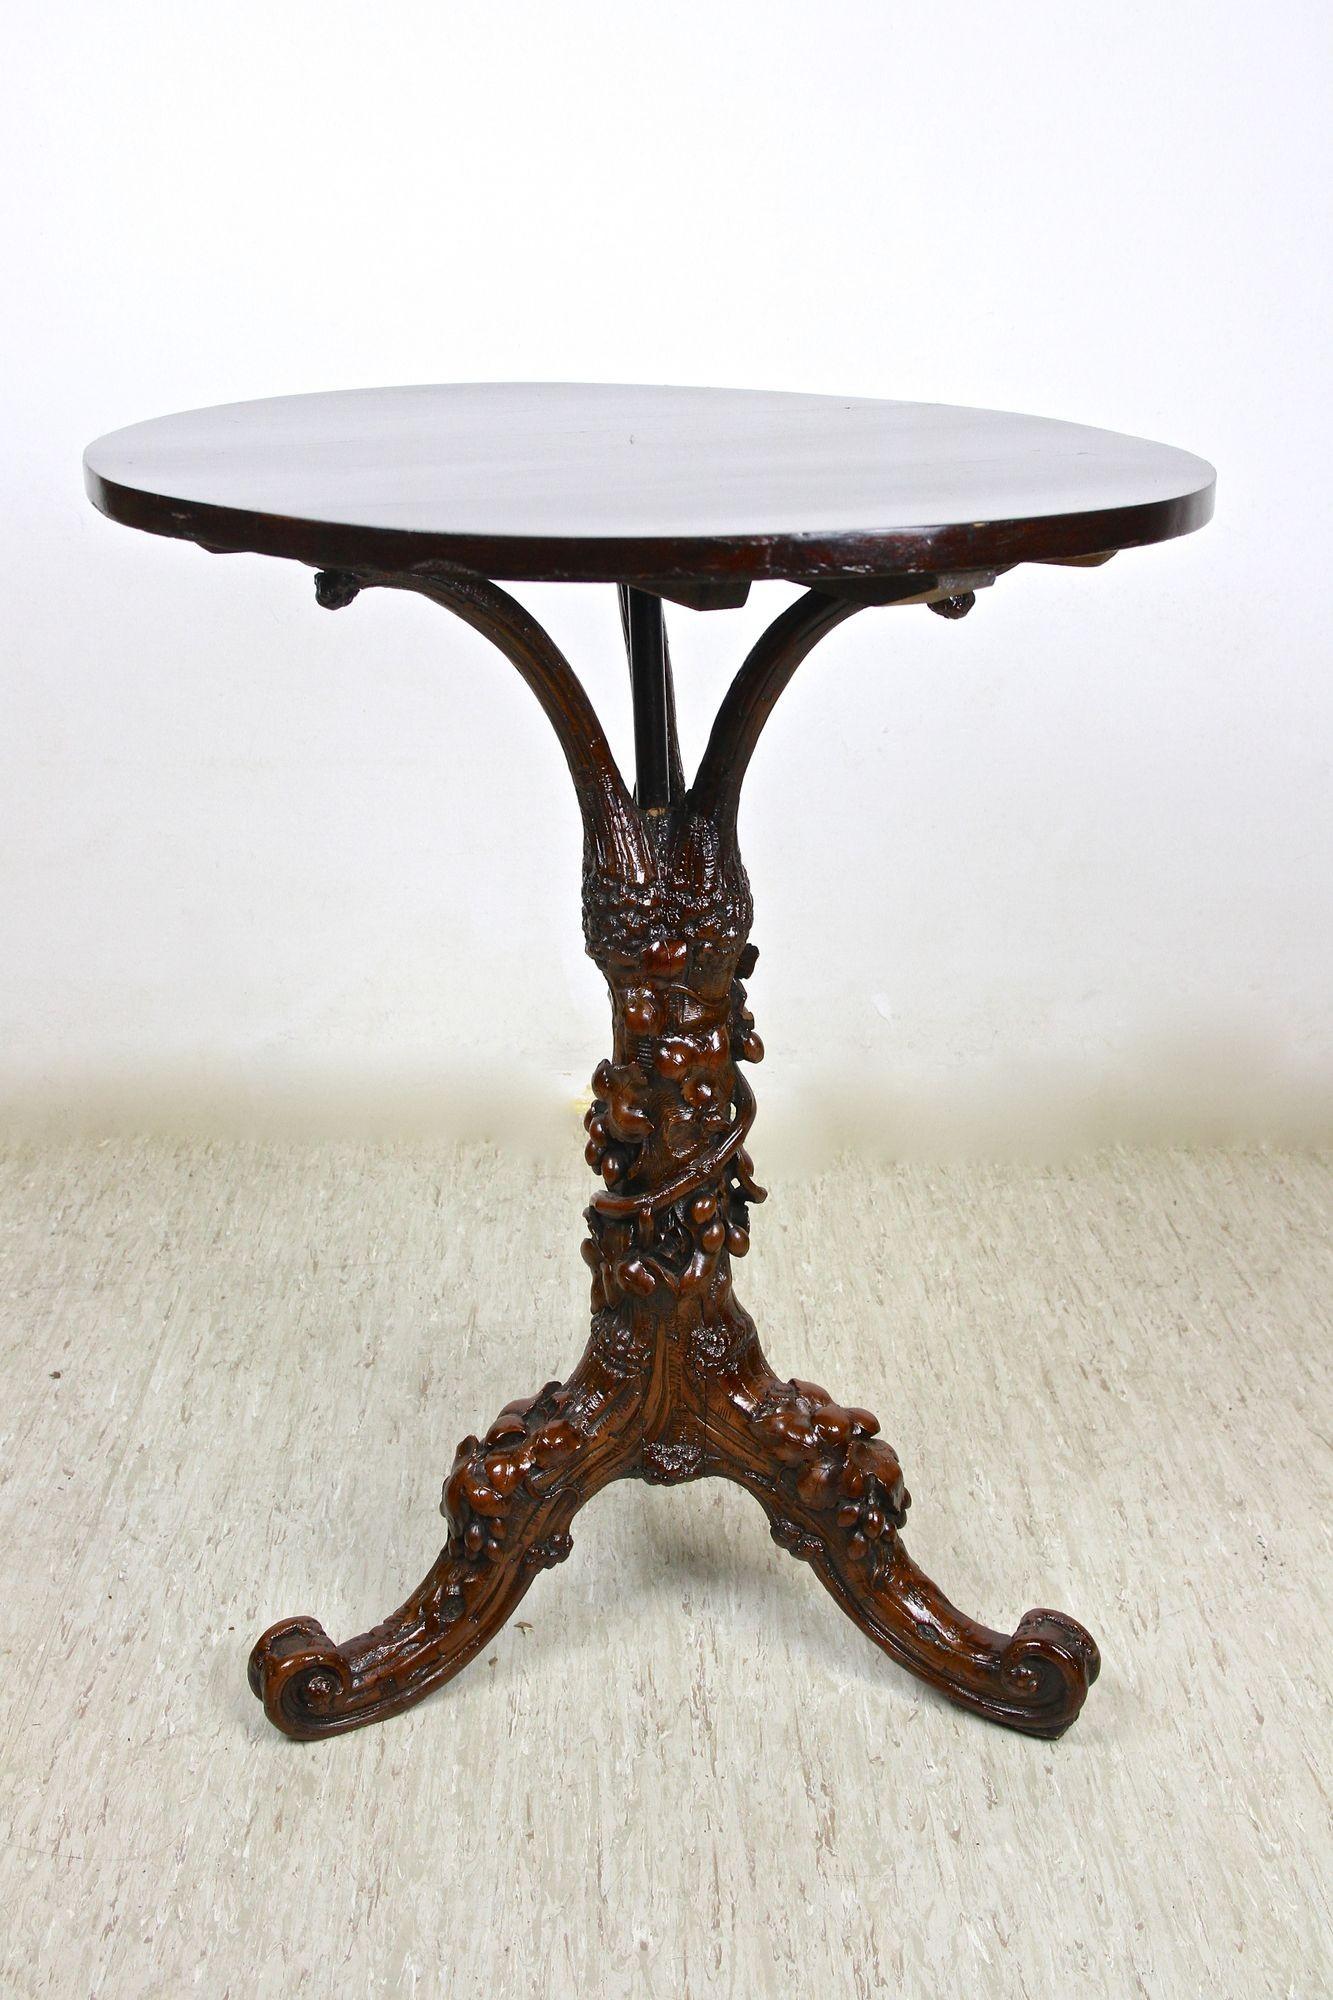 Black Forest Rustic Side Table with Handcarved Vine Theme, Austria, ca. 1880 For Sale 1